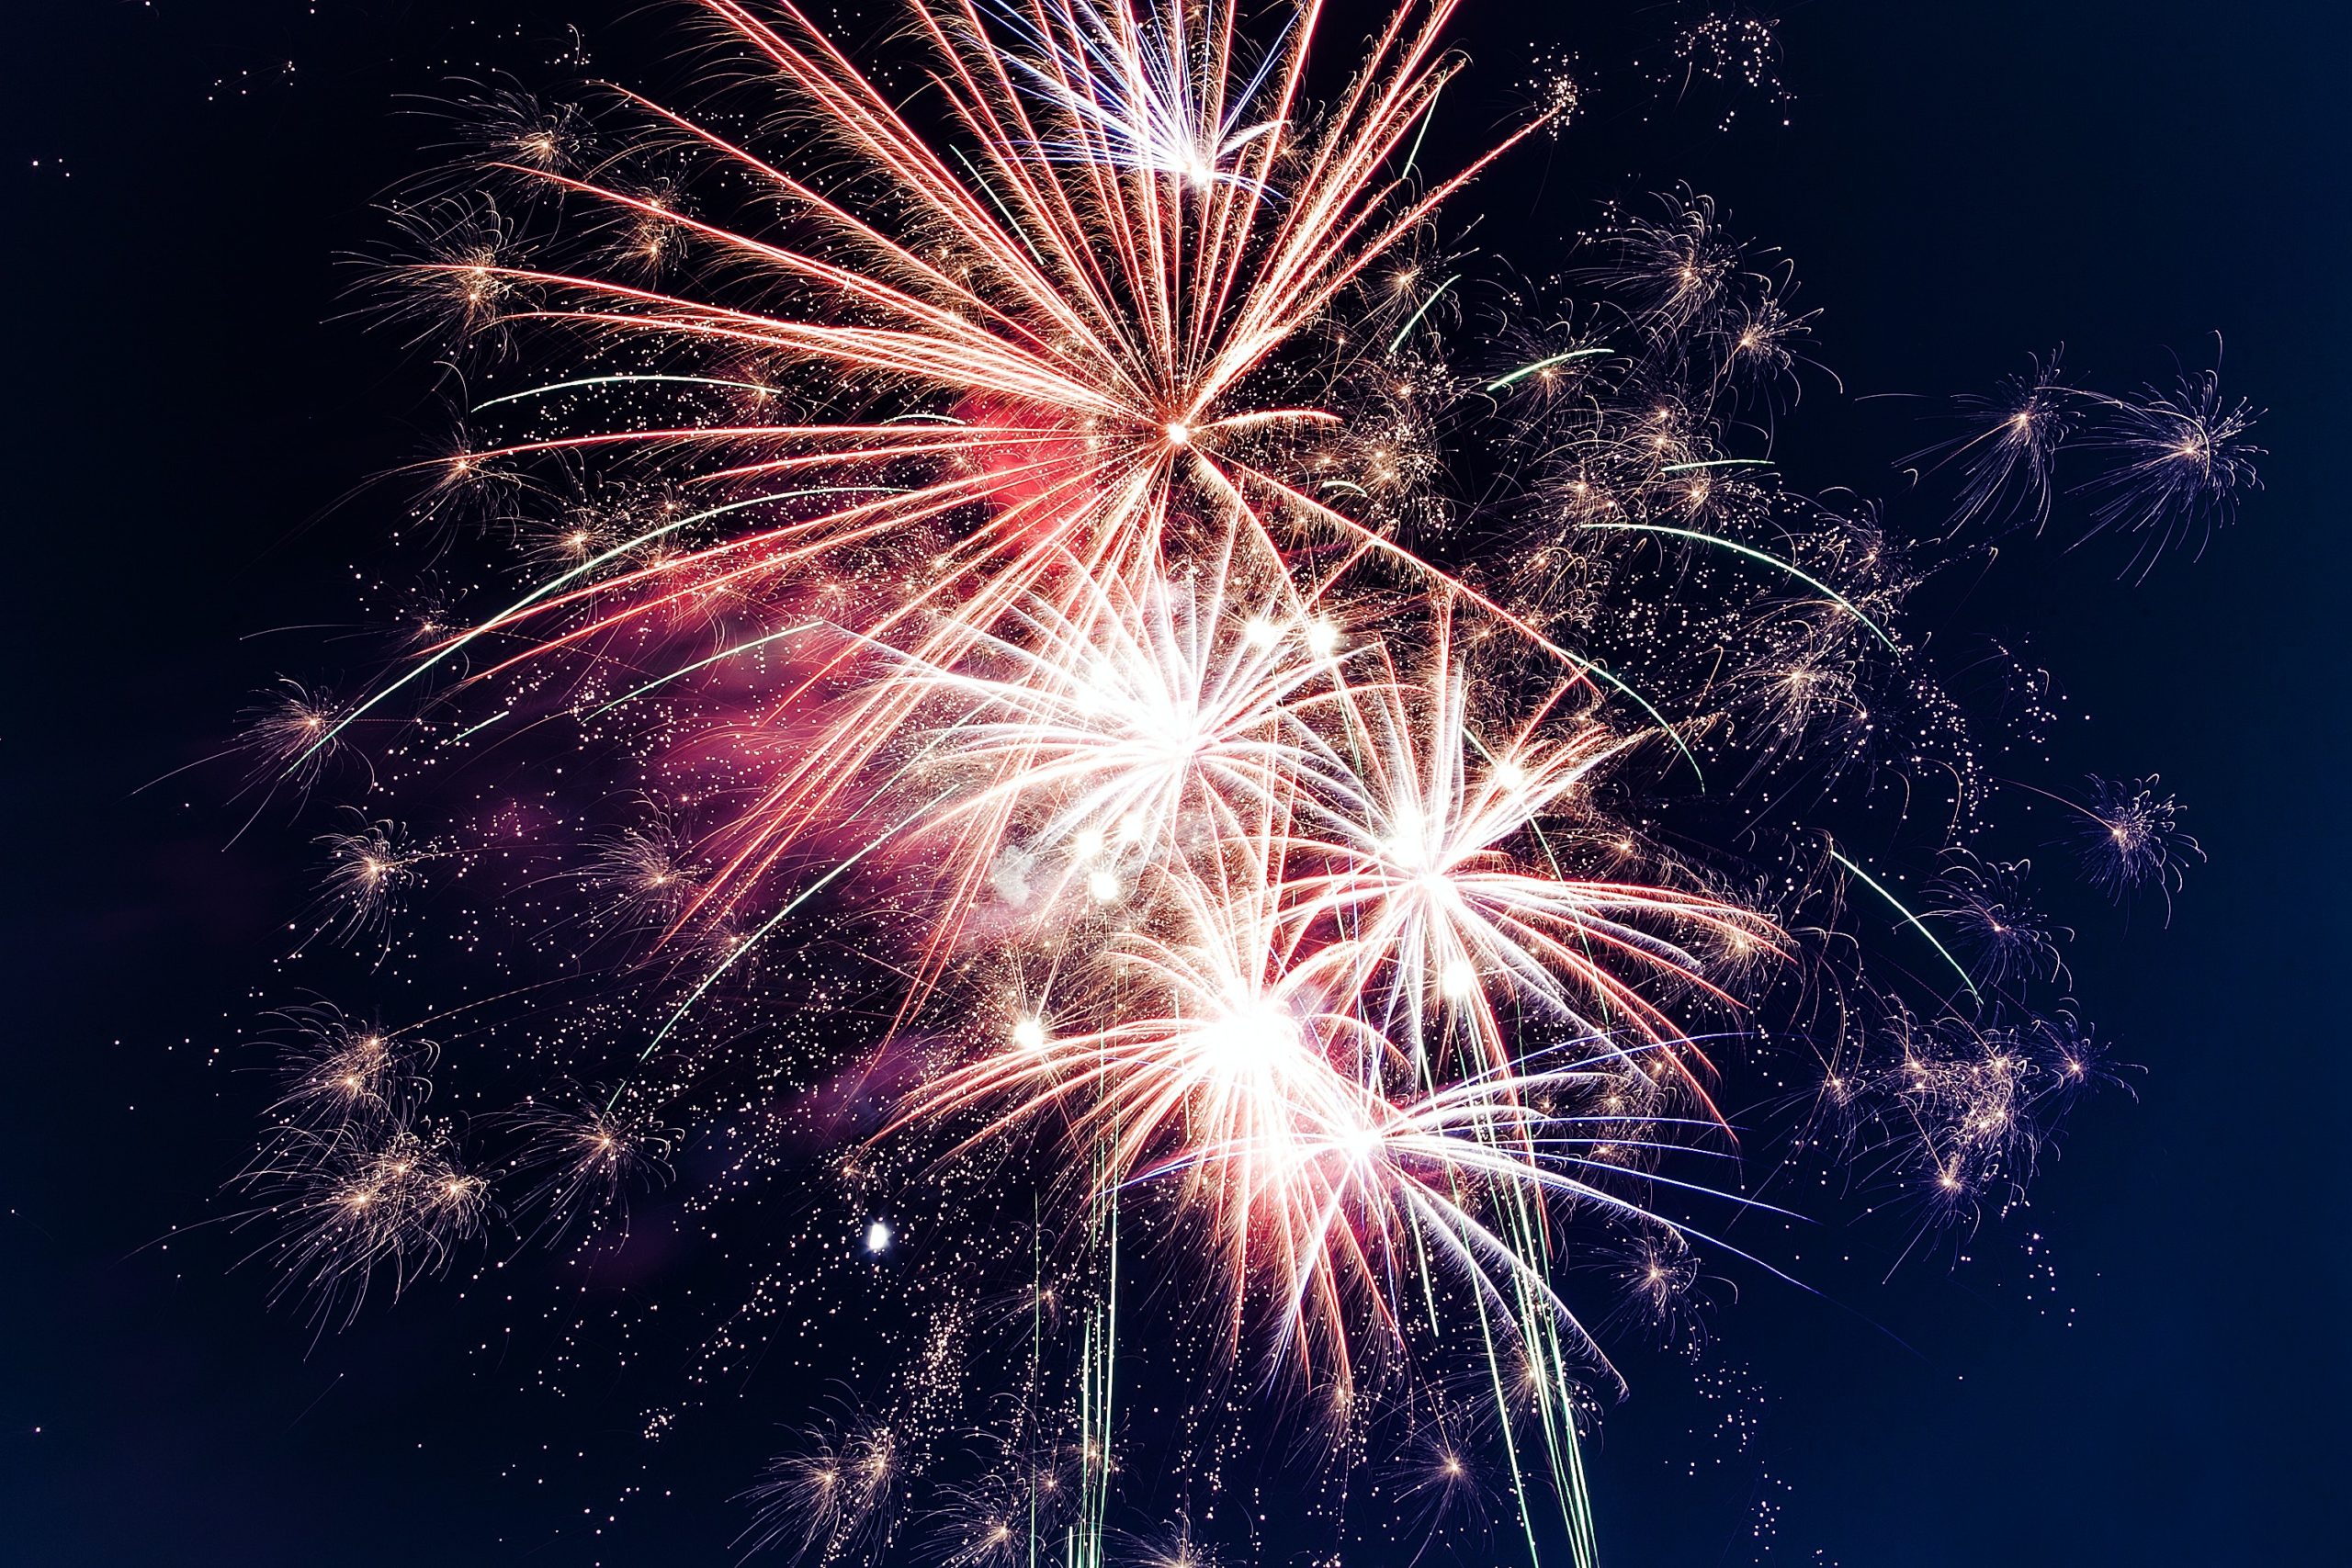 New Fireworks Law in Ohio to Begin July 1, 2022